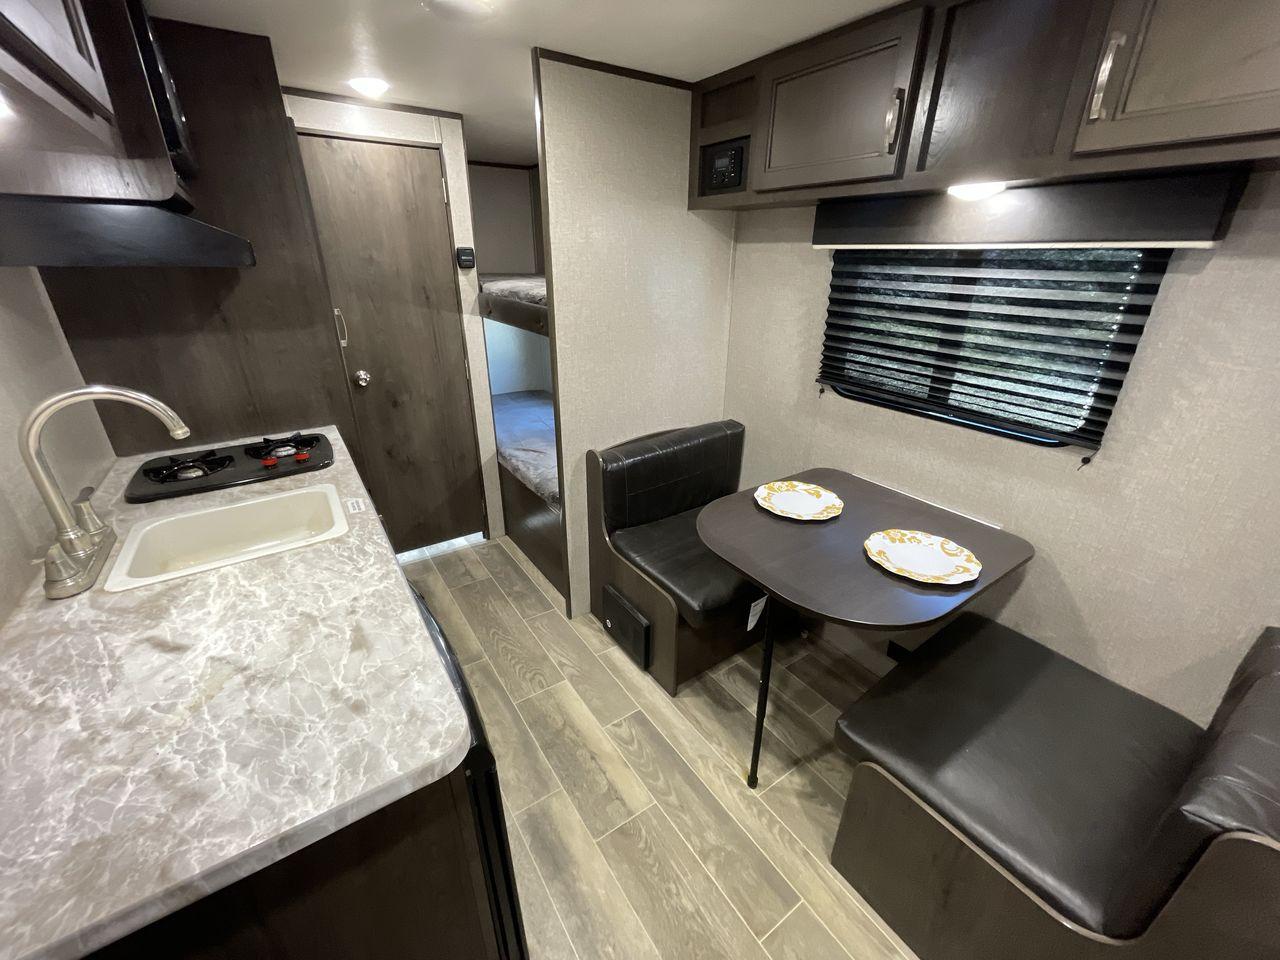 2021 JAYCO JAY FLIGHT SLX 174BH (1UJBJ0AJ1M1) , Length: 21.67 ft | Dry Weight: 3,075 lbs | GVWR: 3,950 lbs | Slides: 0 transmission, located at 4319 N Main St, Cleburne, TX, 76033, (817) 678-5133, 32.385960, -97.391212 - Take the 2021 Jayco Jay Flight SLX 174BH travel trailer out on your camping adventures. This lightweight and small RV is ideal for people looking for an affordable and cozy way to enjoy the great outdoors. The dimensions of this unit are 21.67 ft in length, 7.08 ft in width, and 9.17 ft in height. I - Photo #11